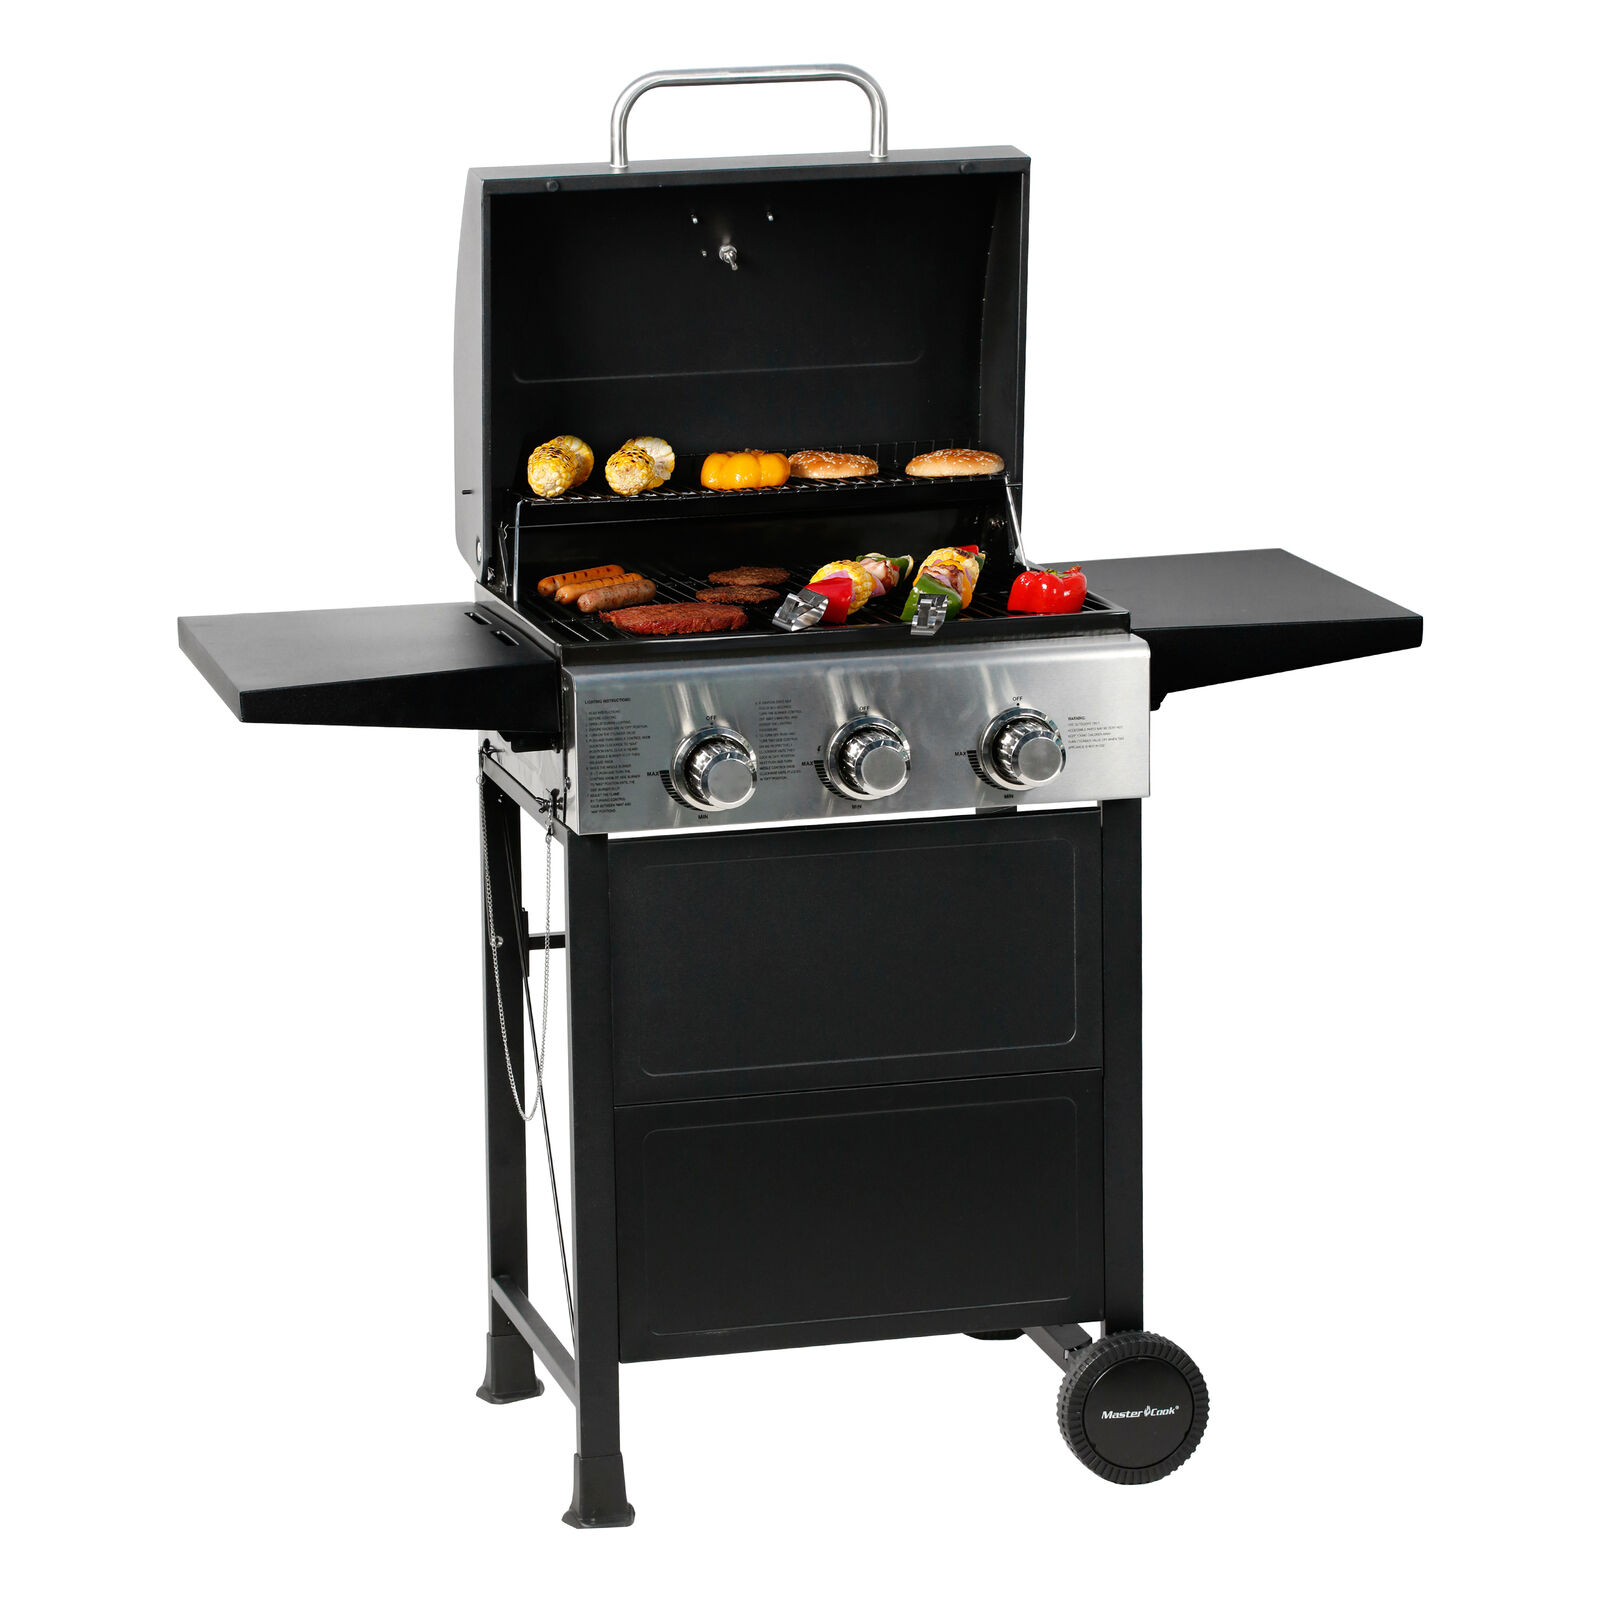 3 Burner Gas Grill BBQ Garden Patio Stainless Steel Outdoor Cooking Barbecue